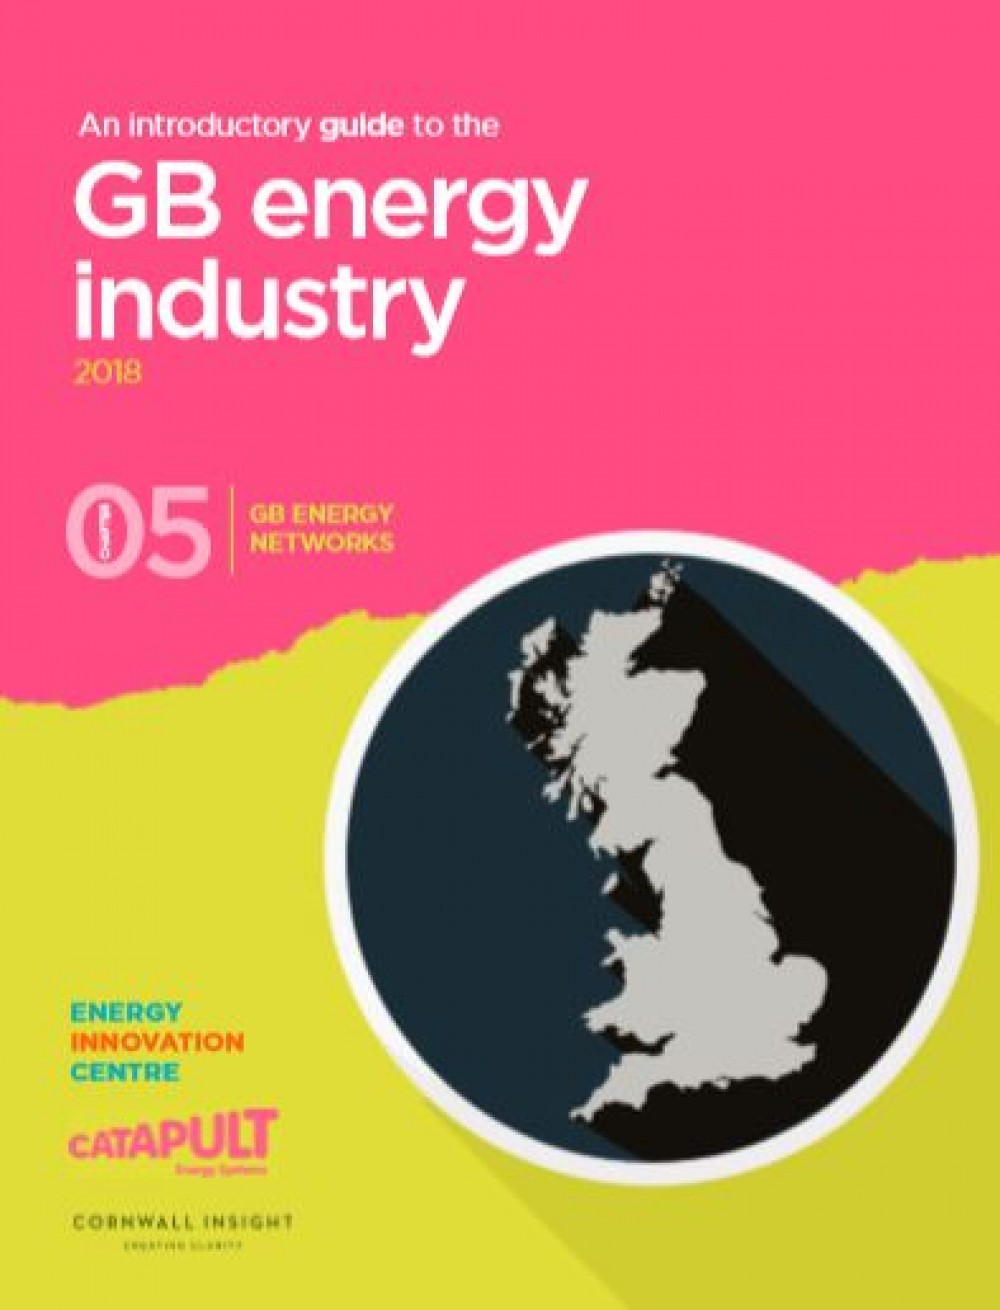 An introductory guide to the GB energy industry: GB energy networks